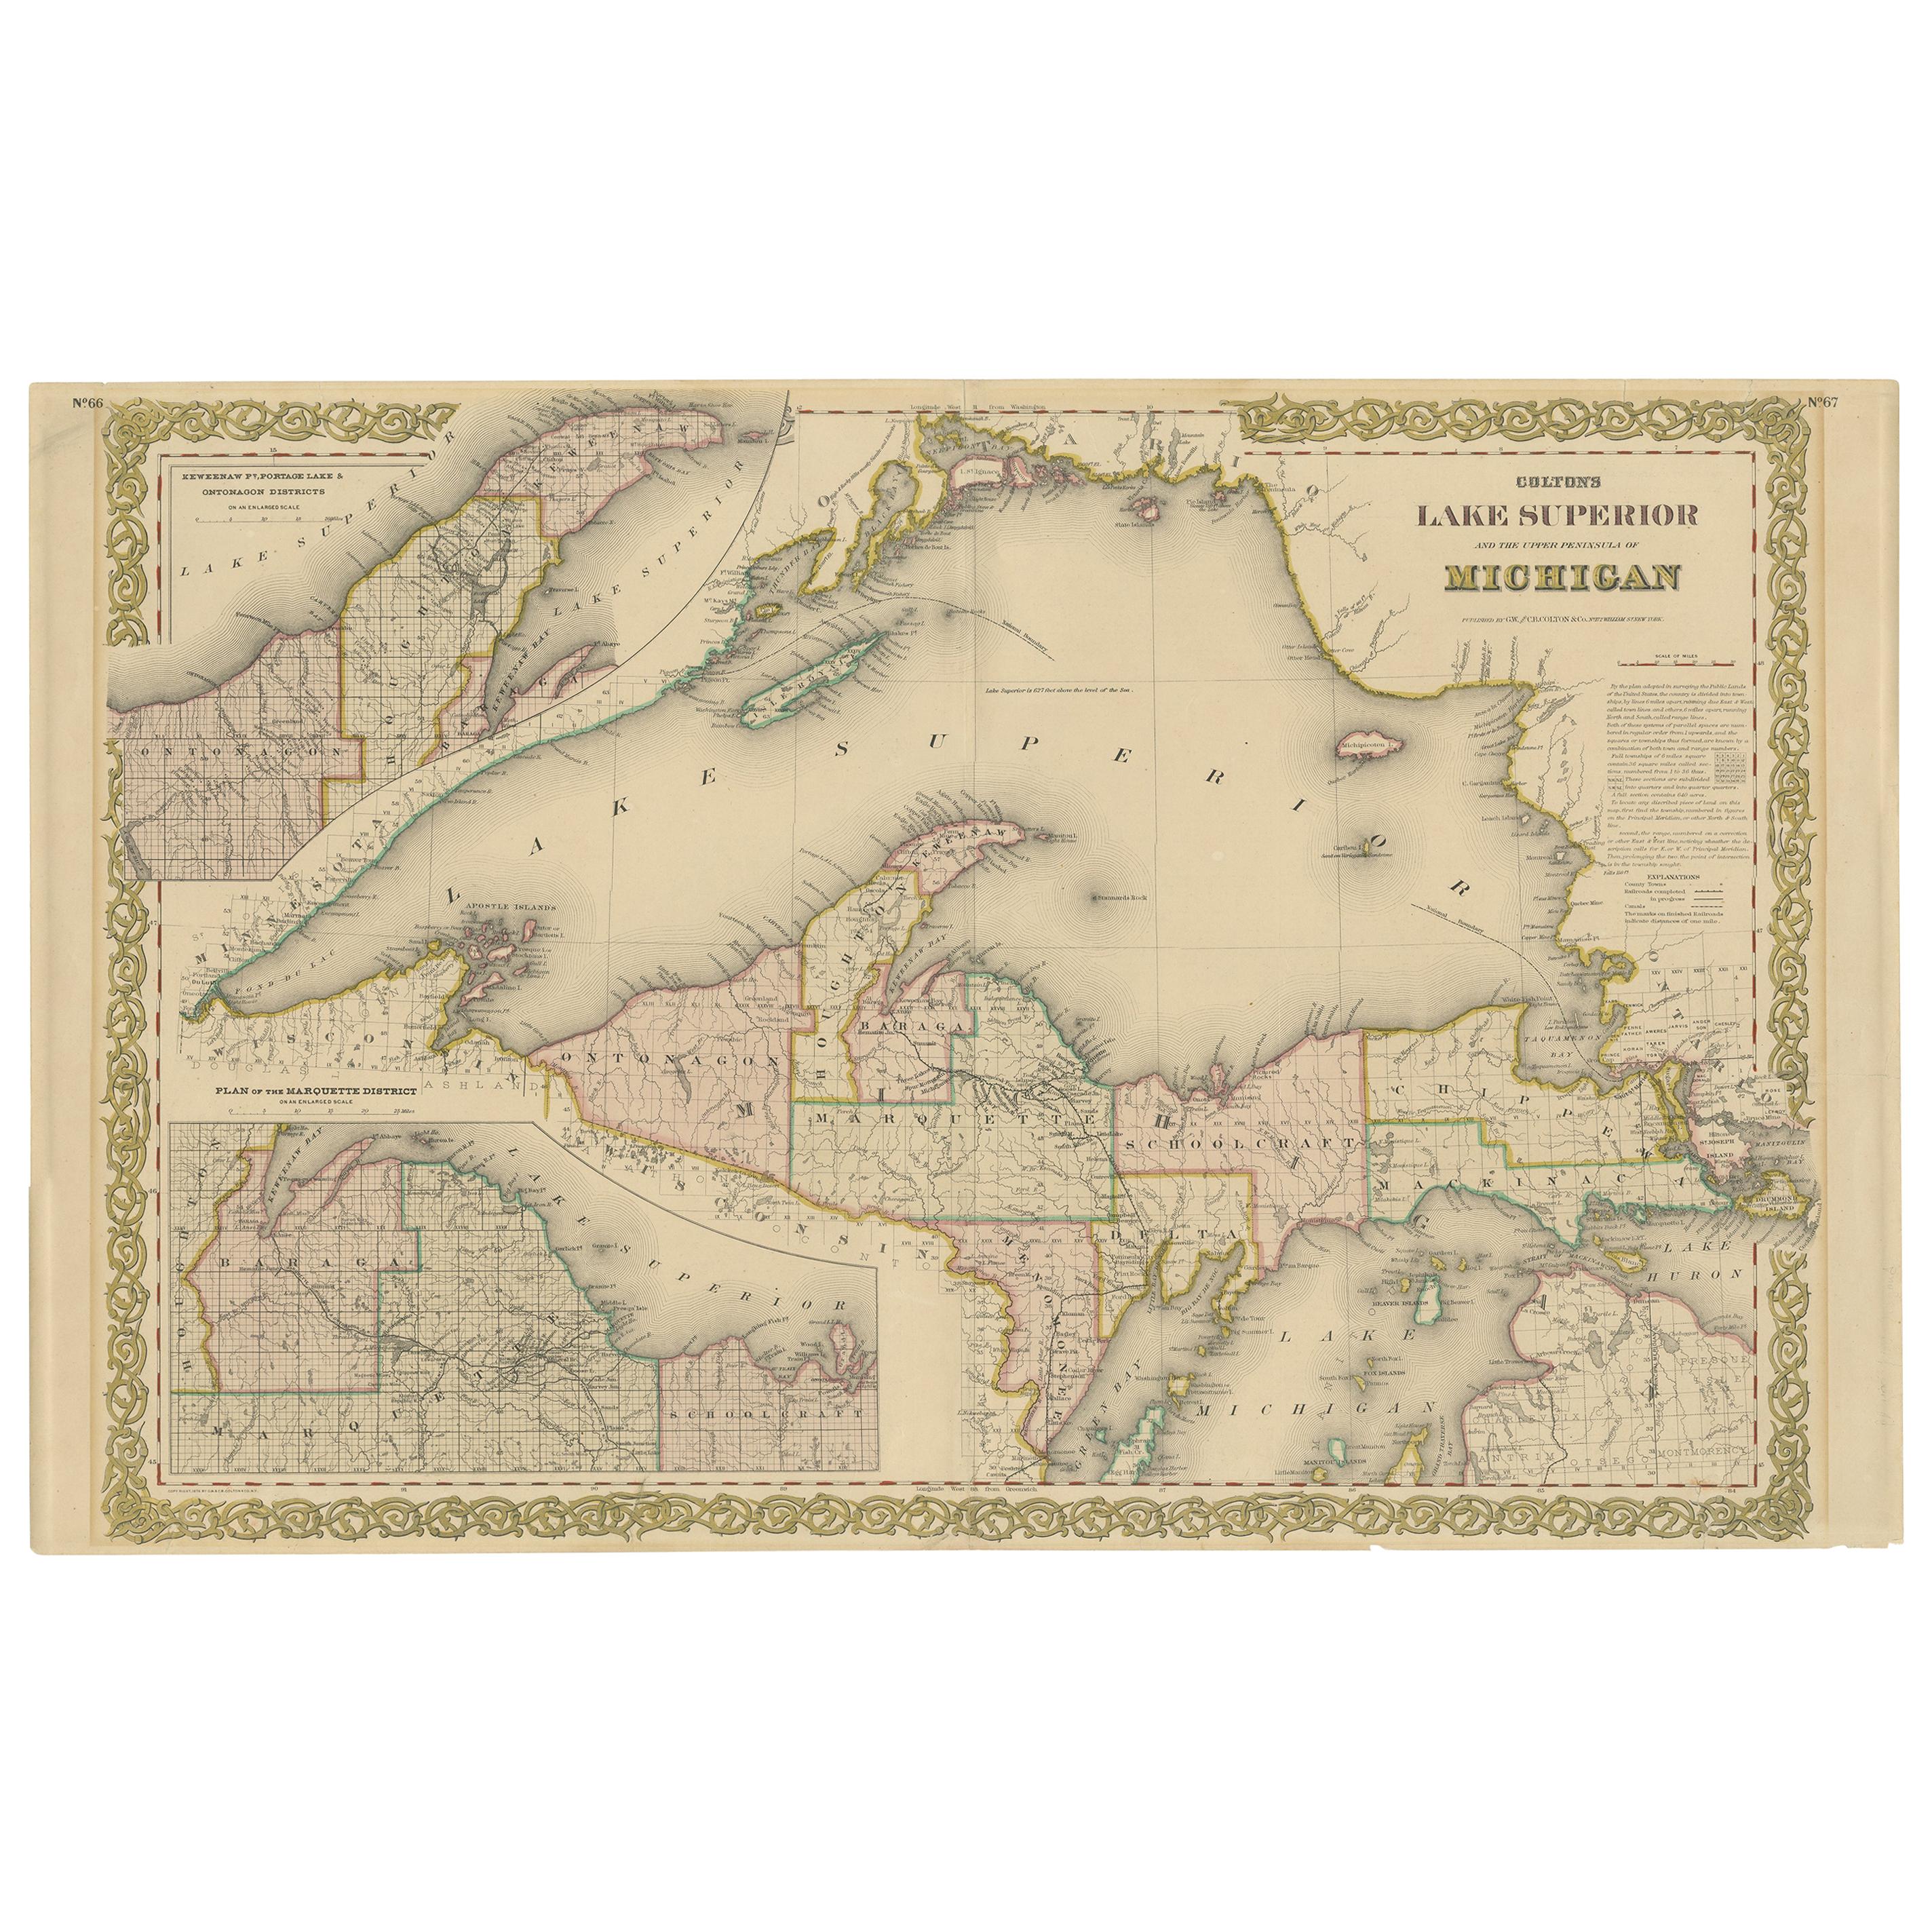 Antique Map of Lake Superior and the Upper Peninsula of Michigan 'c.1870'